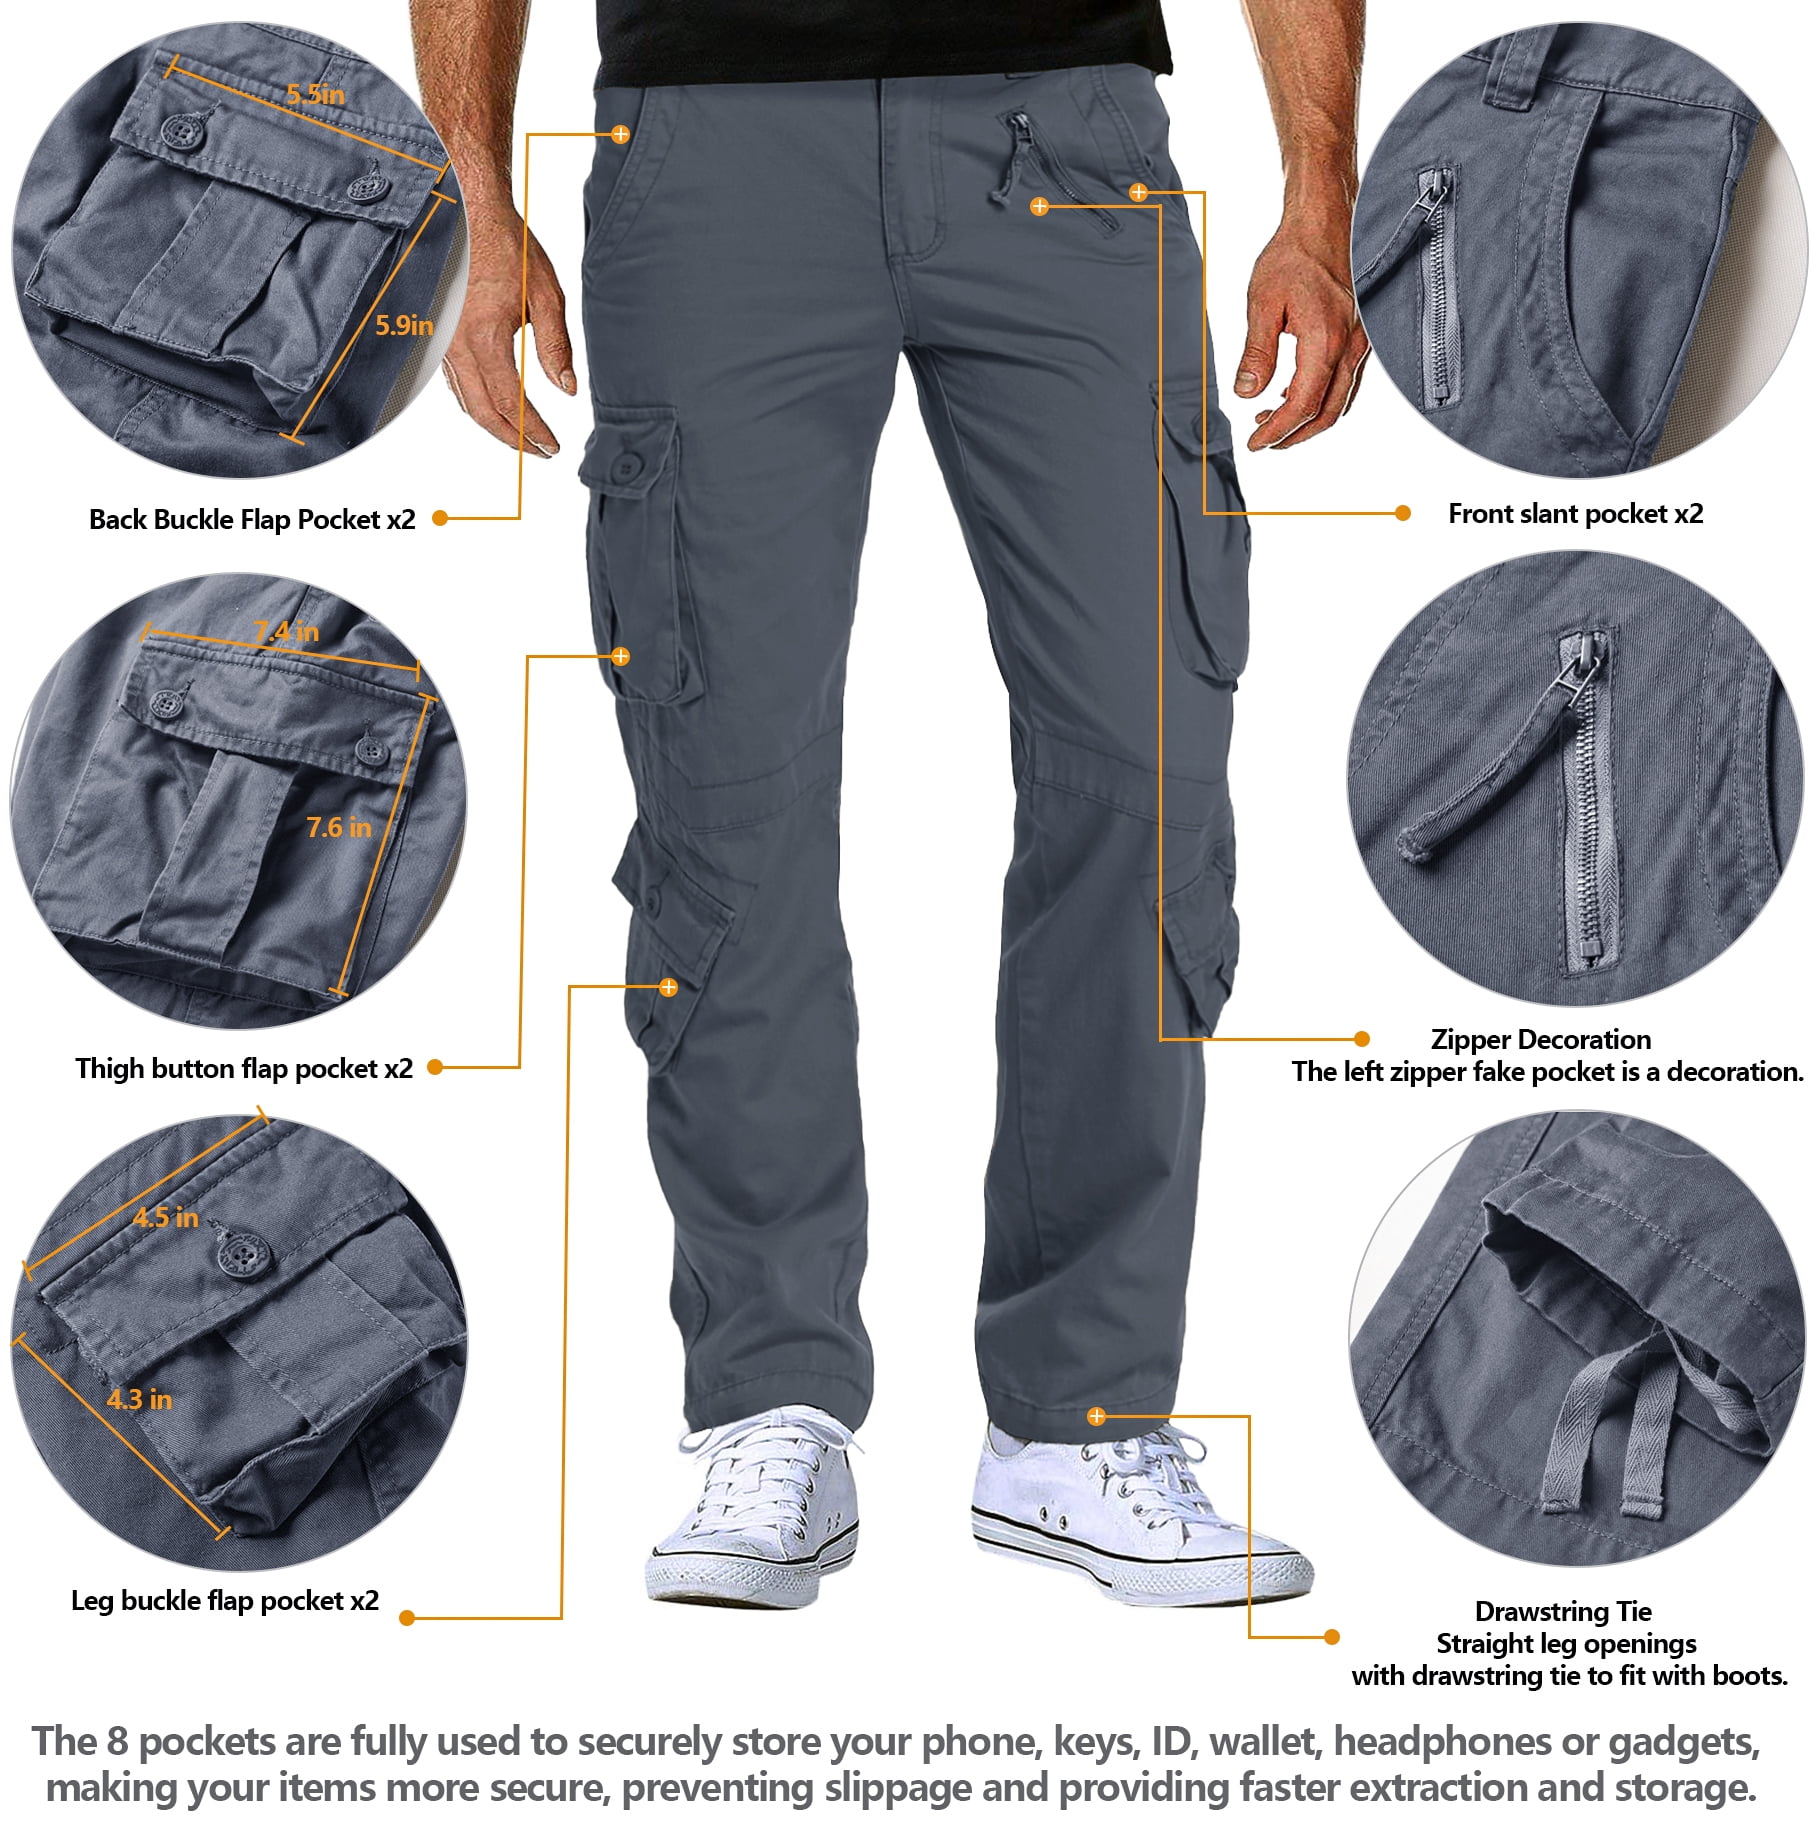 How To Style Cargo Pants: Stylish Outfits for Modern Look